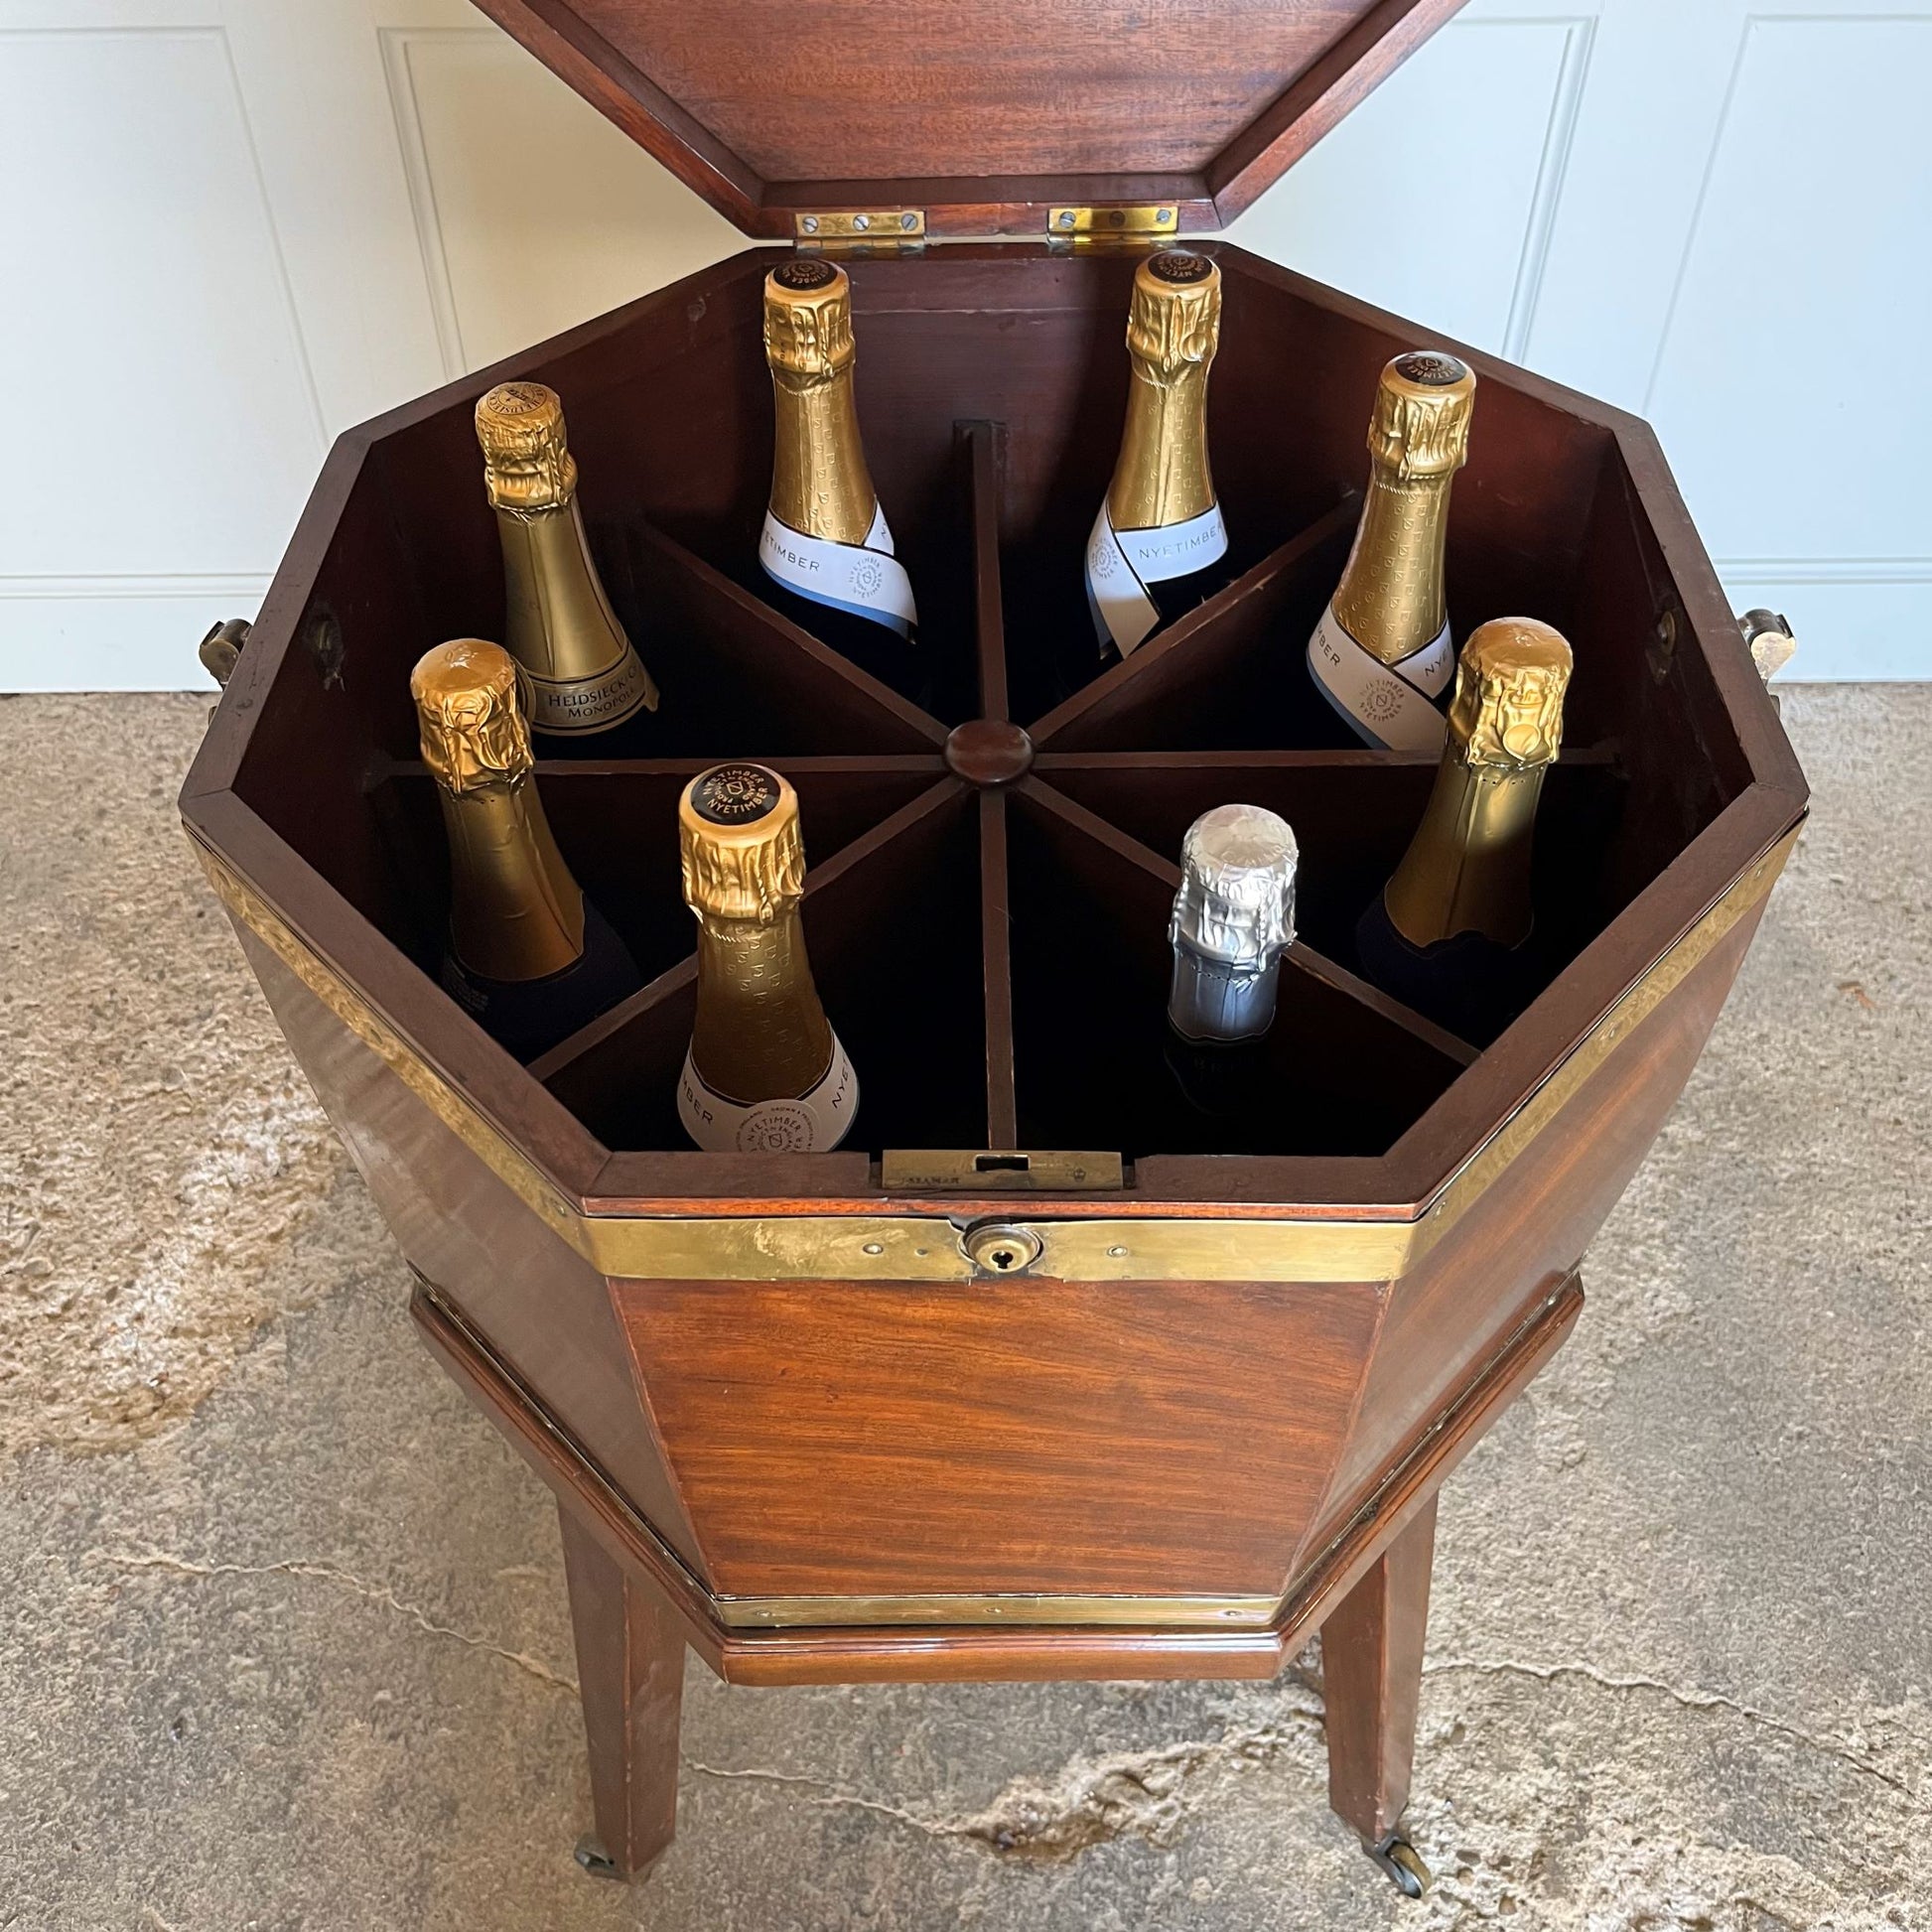 A George III mahogany octagonal brass bound wine cooler on its original stand. The hinged lid encloses an eight division interior, with brass carrying handles on the side and a fixed stand with square tapering legs on brass castors. A beautiful patina throughout. A small piece of brass trim is missing around the face of the lock, the catch of which does not completely close, leaving a gap at the front of c. 0.5cm when shut, as reflected in the price.